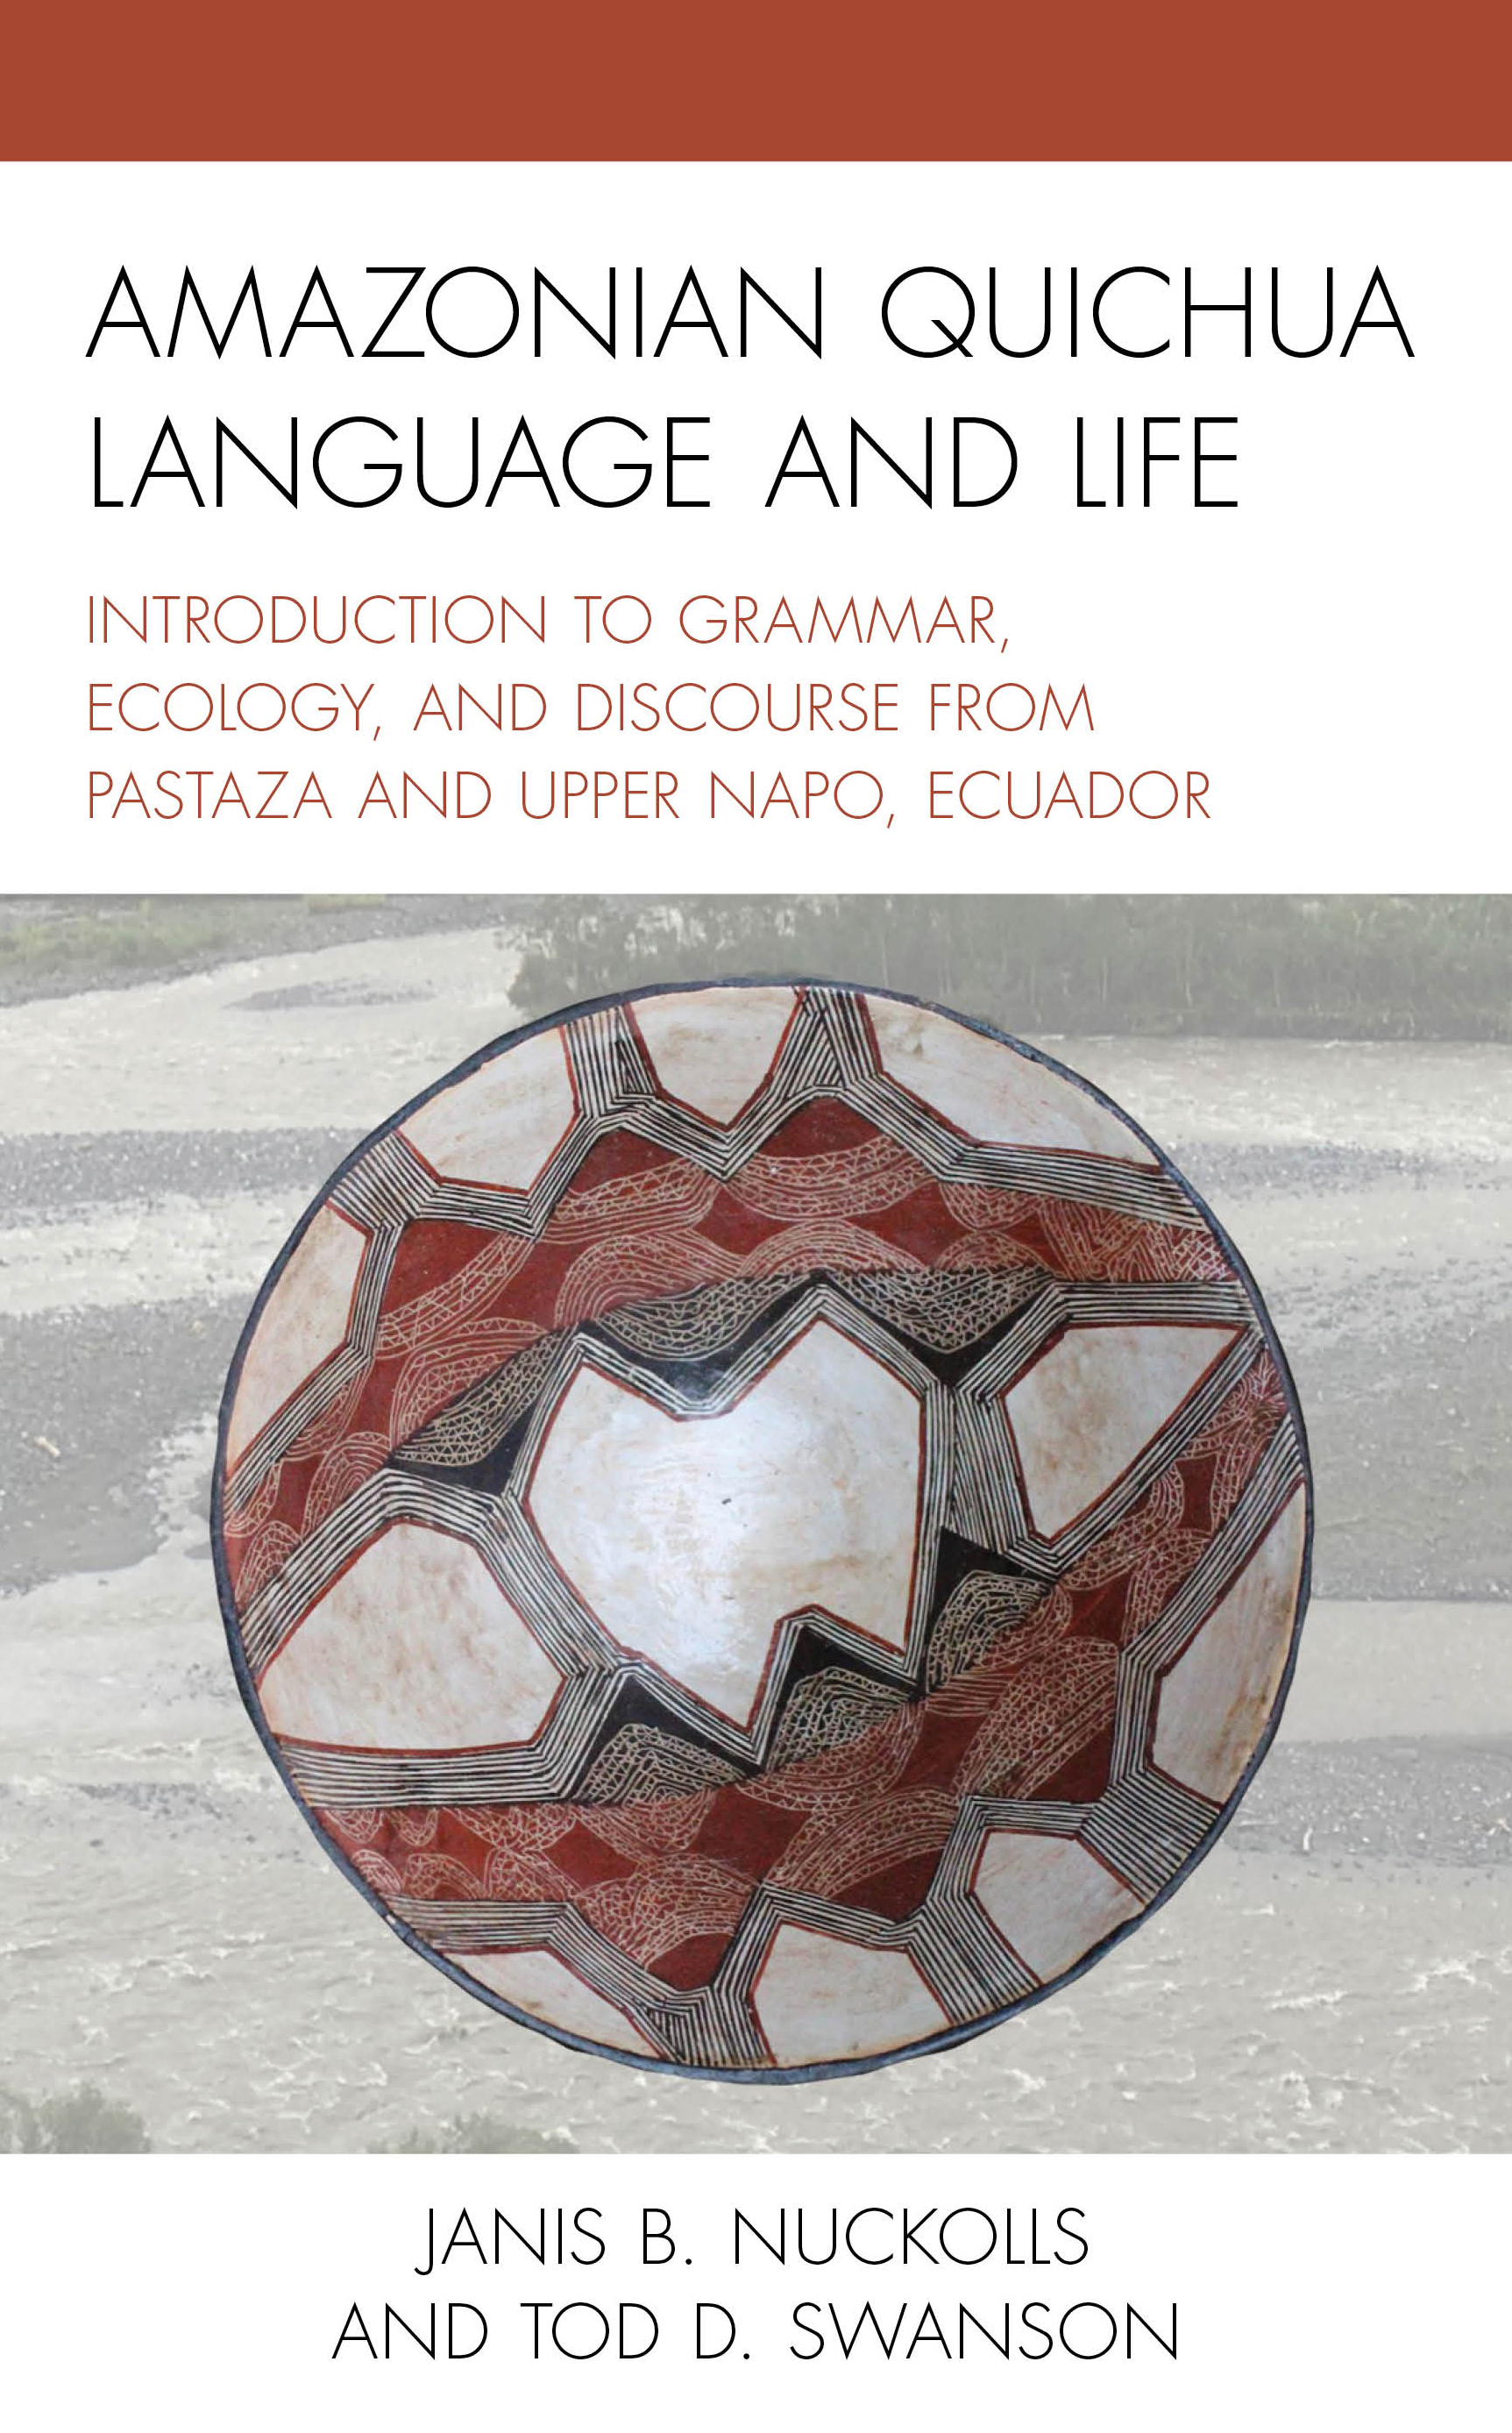 Amazonian Quichua Language and Life: Introduction to Grammar, Ecology, and Discourse from Pastaza and Upper Napo, Ecuador